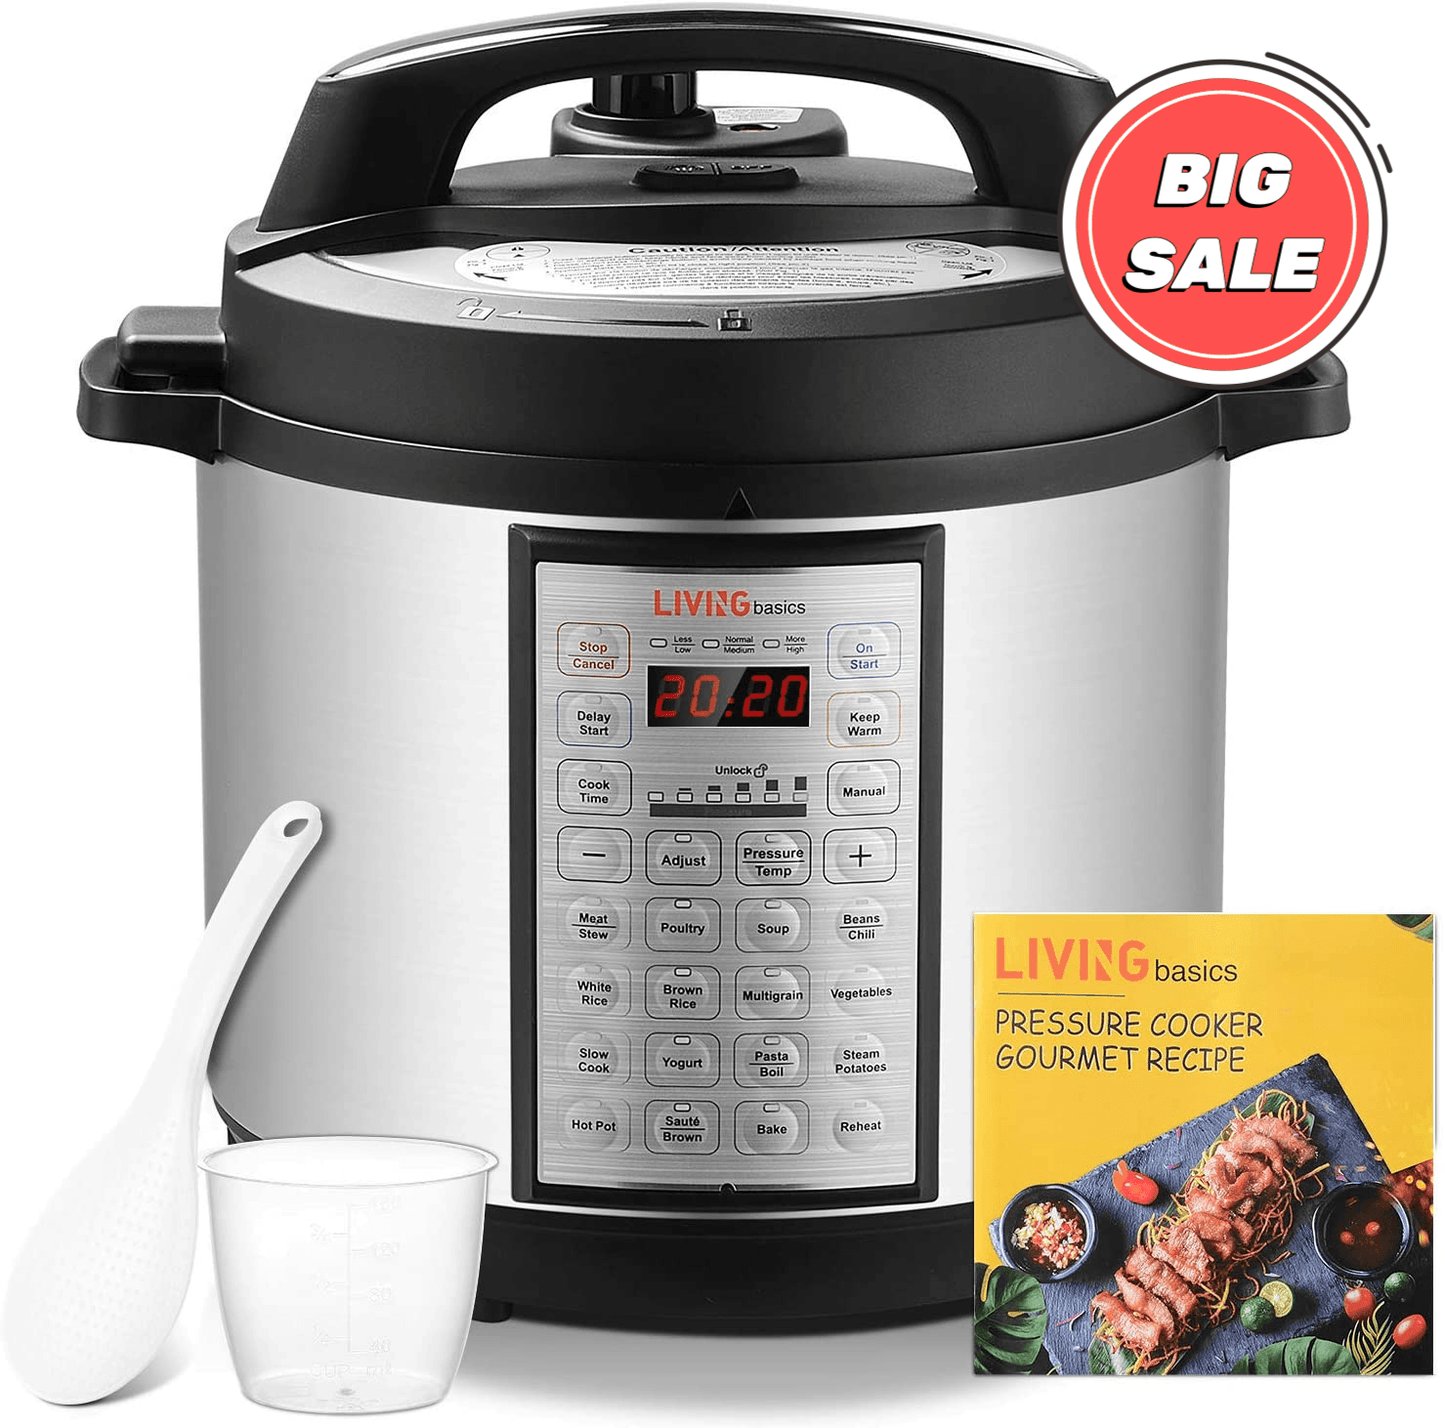 LIVINGbasics 6 Quart Electric Pressure Cooker, 18-in-1 Multi-Function Programmable Pressure Cooker, Stainless Steel Inner Container Slow Cook Rice Cooker Steamer Sauté Yogurt Maker Warmer LB-PC-100M1H2 - YOURISHOP.COM